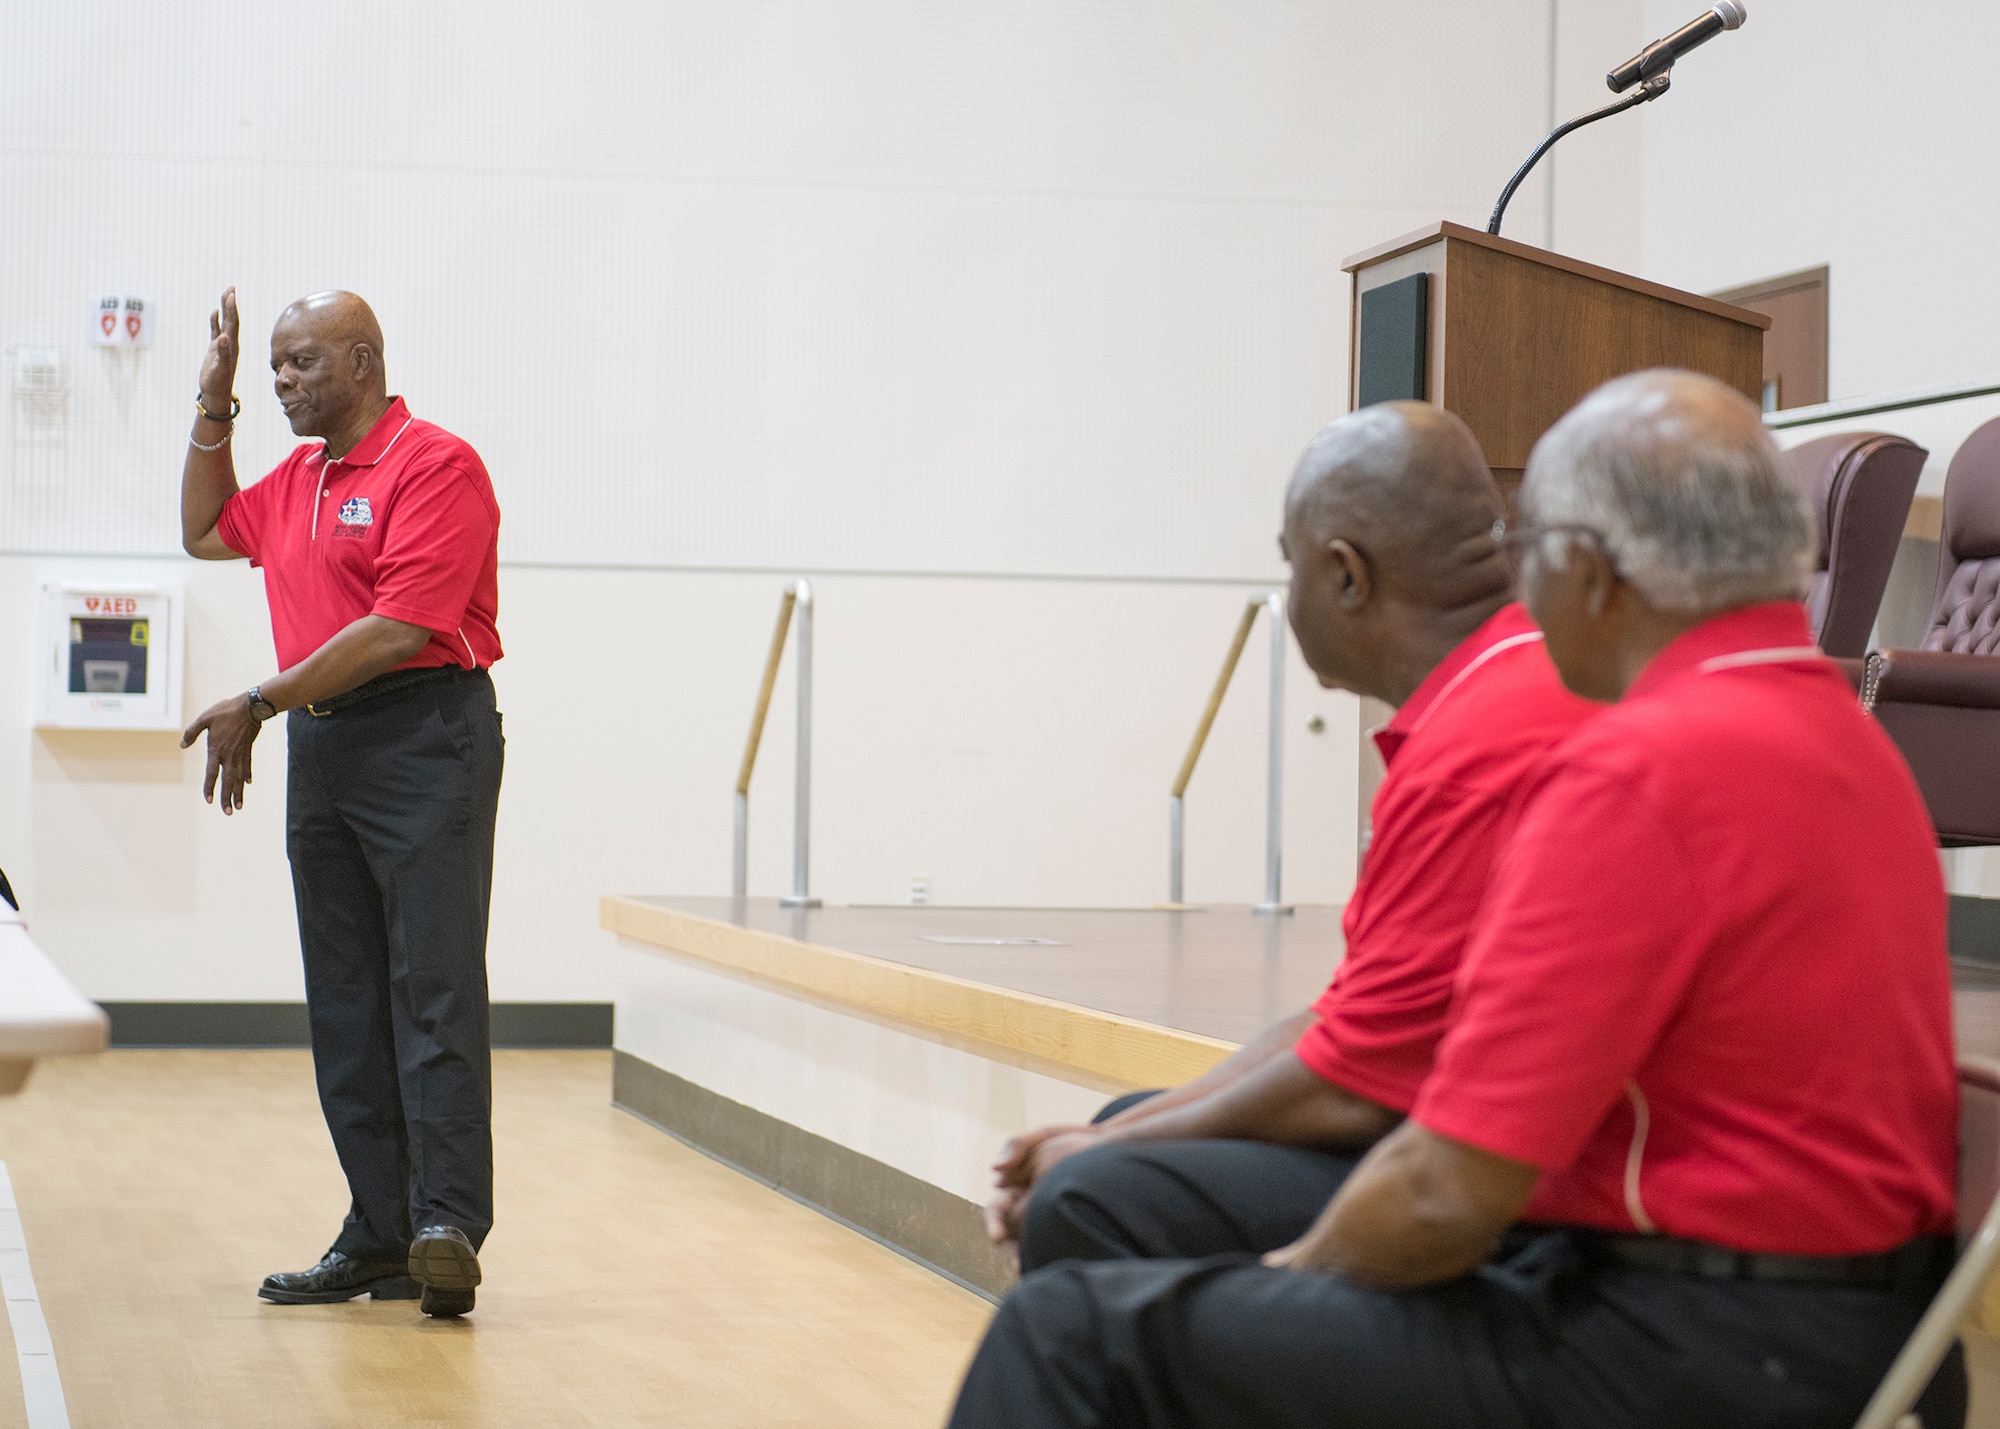 Retired U.S. Air Force Chief Master Sgt. Alfredo Tulle, member of the Archer-Ragsdale Arizona chapter of Tuskegee Airmen Incorporated, speaks during a Black History Month panel discussion Feb. 27, 2020, at Luke Air Force Base, Ariz.